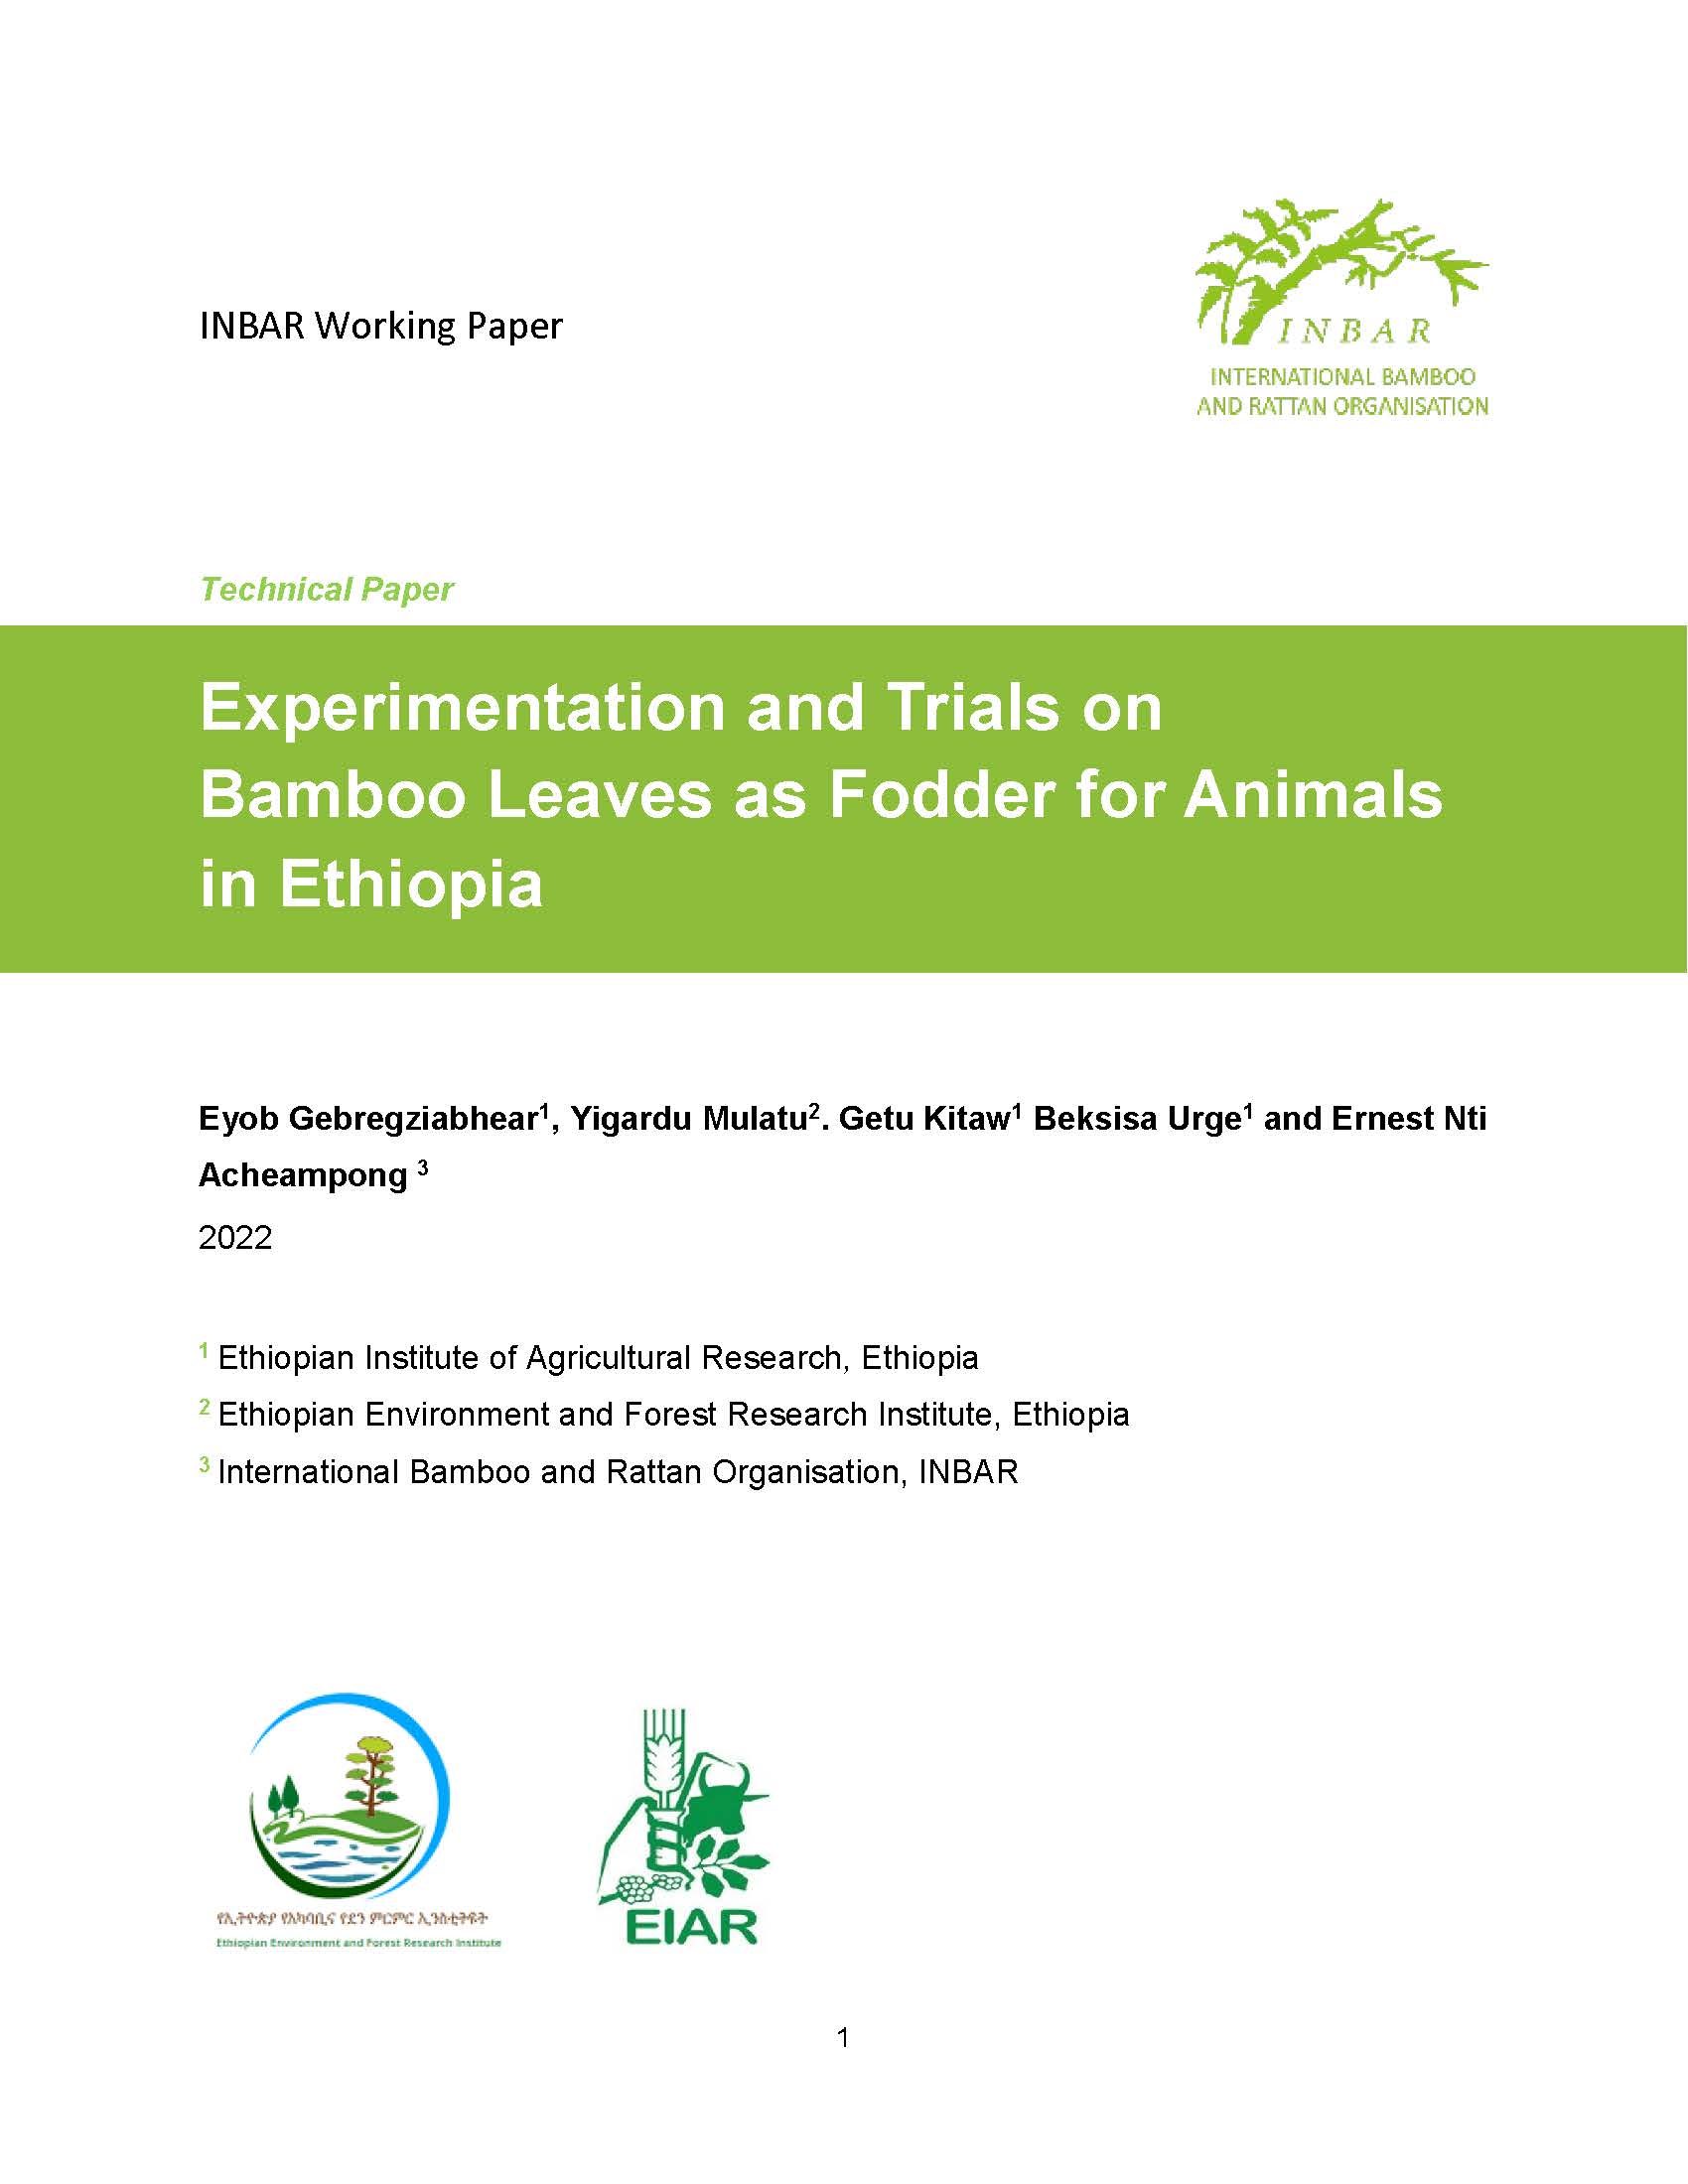 Experimentation and Trials on Bamboo Leaves as Fodder for Animals in Ethiopia